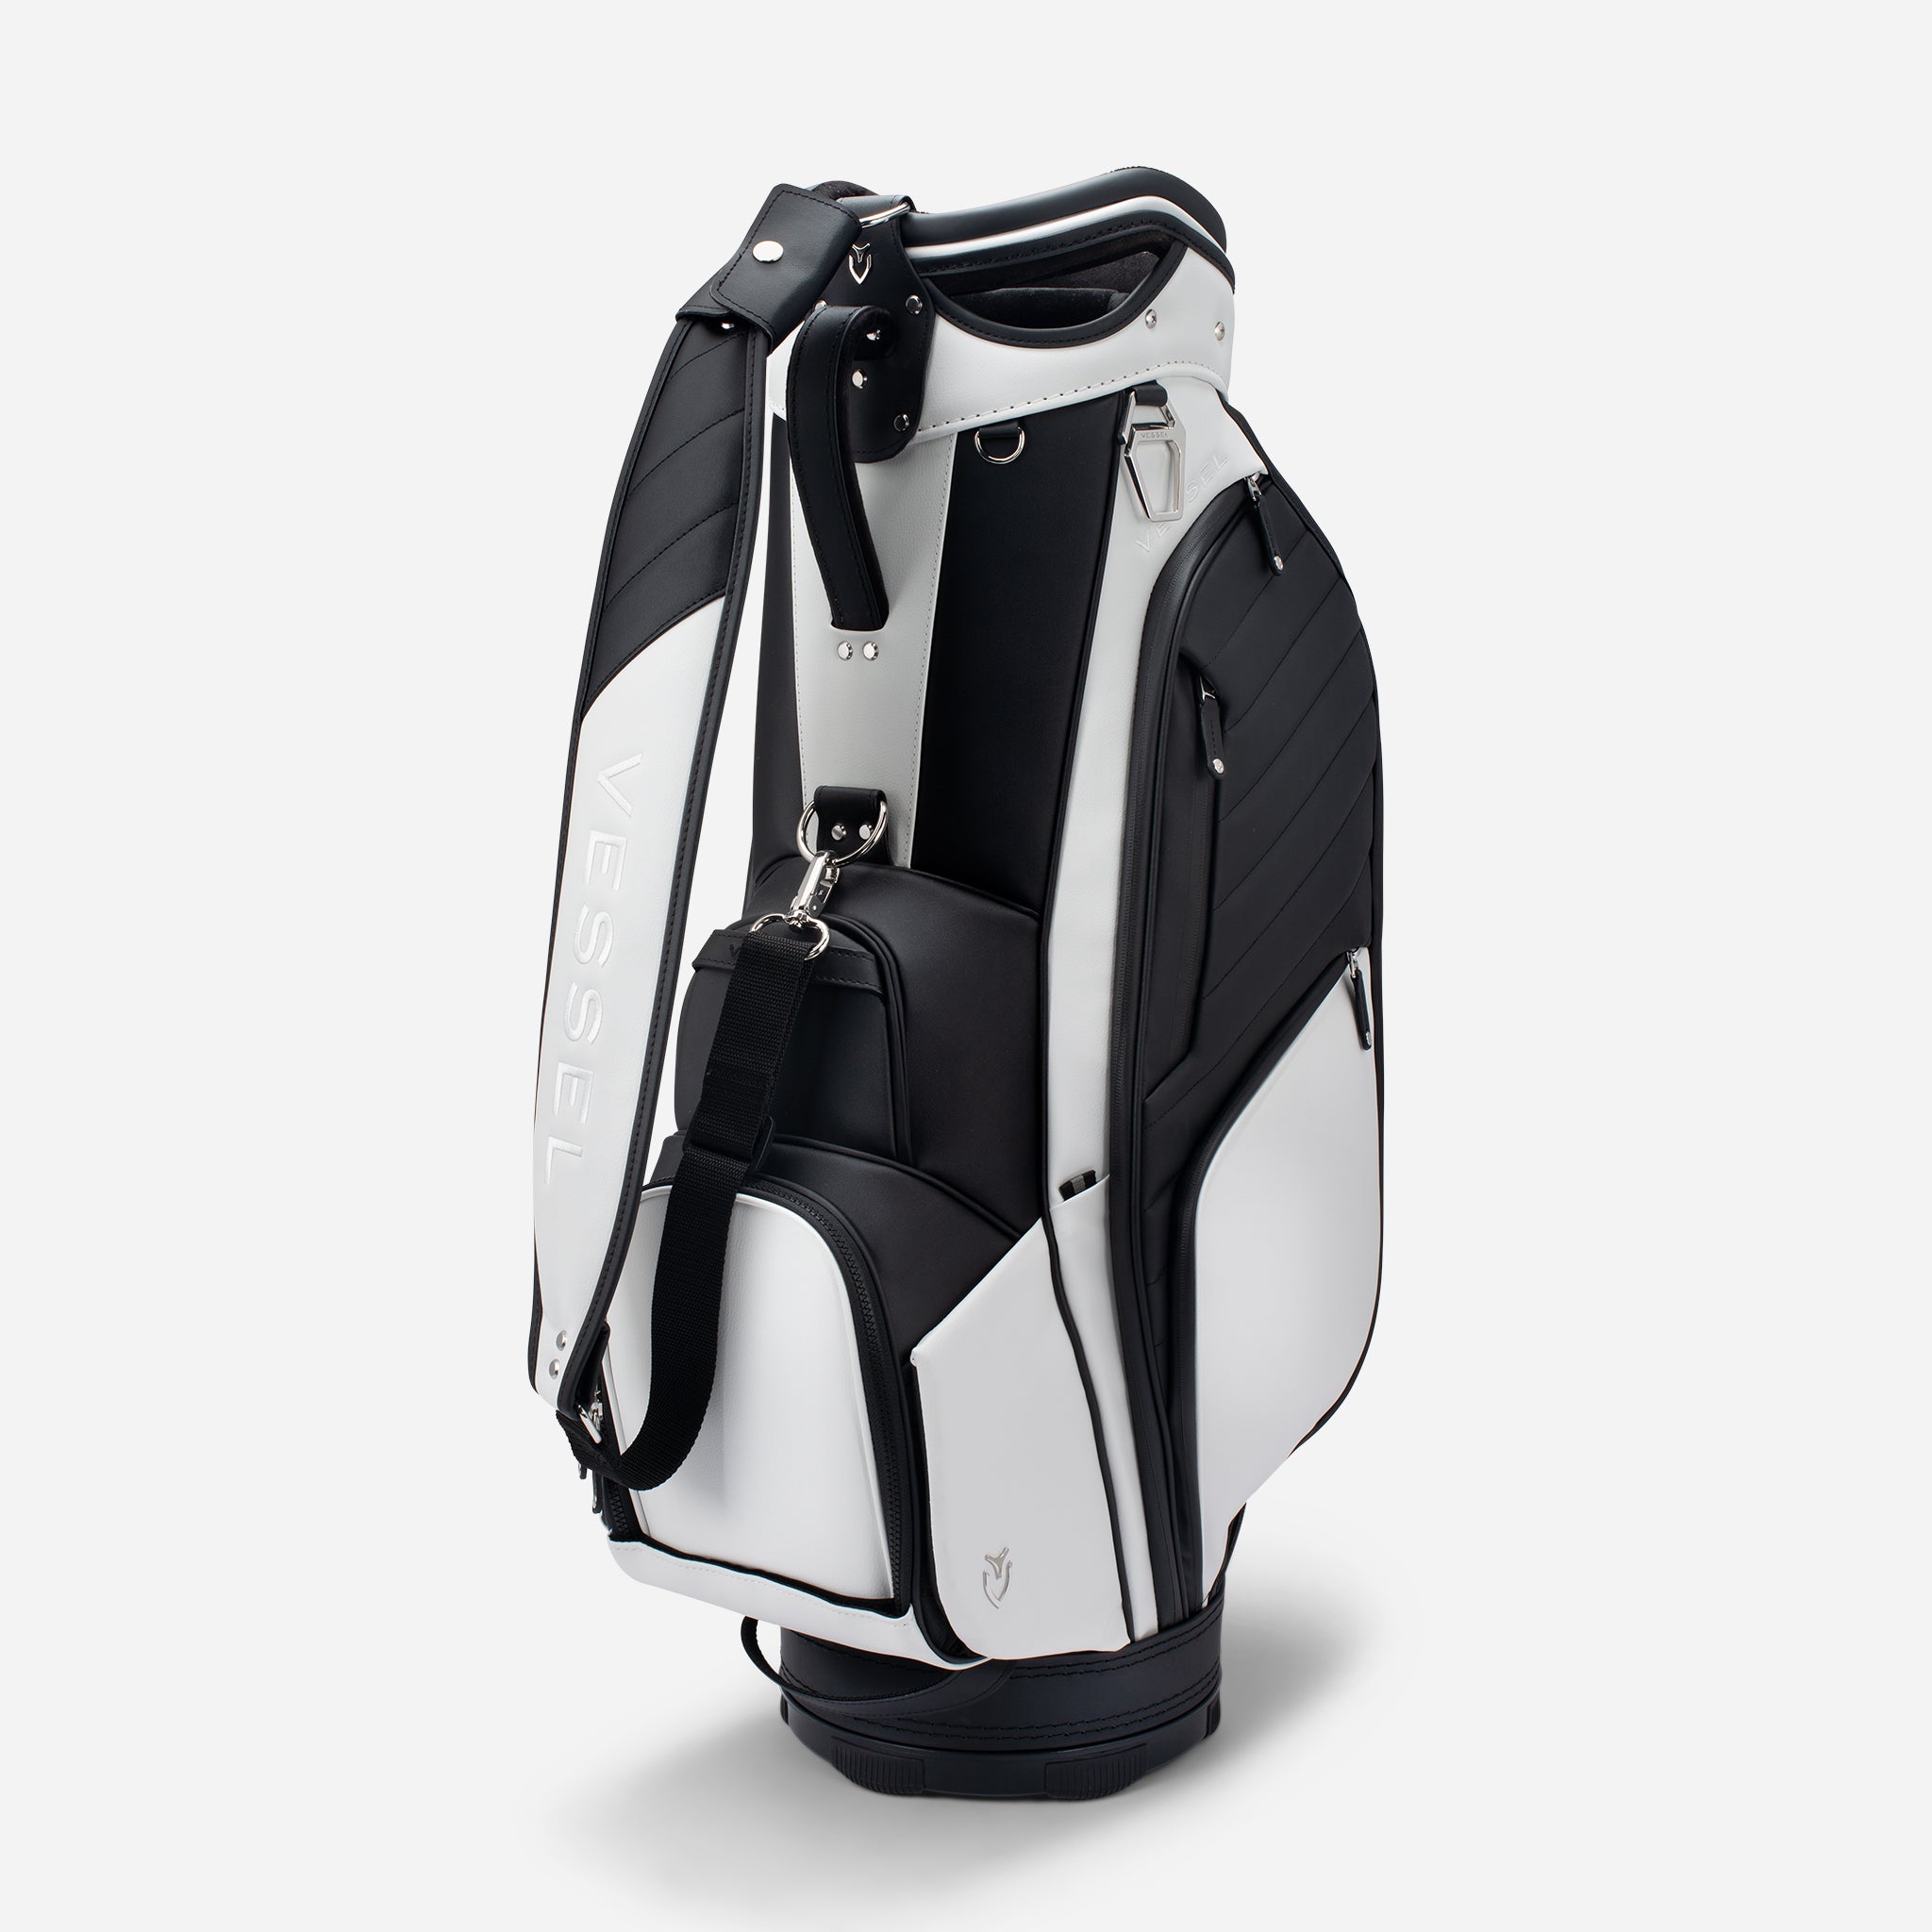 Discover the Lux Prime: Vessel’s Pinnacle of Cart Bag Innovation